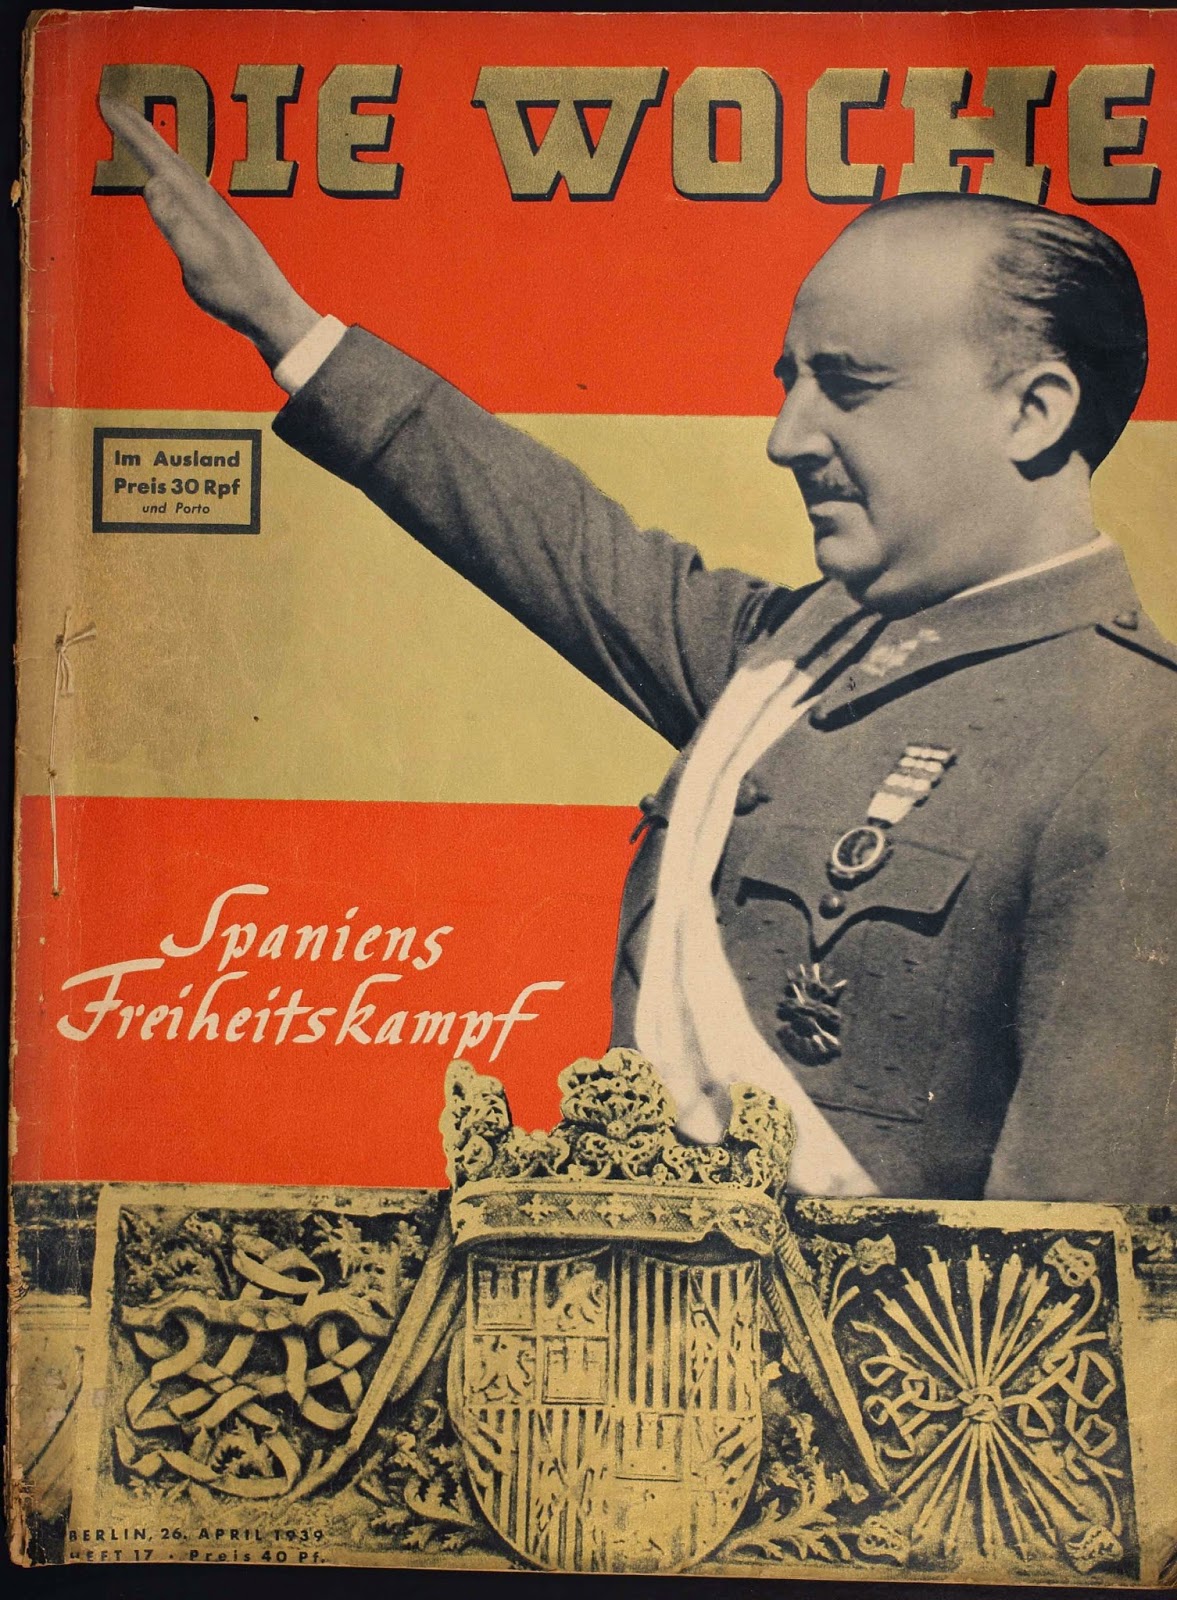 Cover of the Apr.26, 1939 edition of German magazine "Die Woche" with photo of Spanish commander Franco saluting.